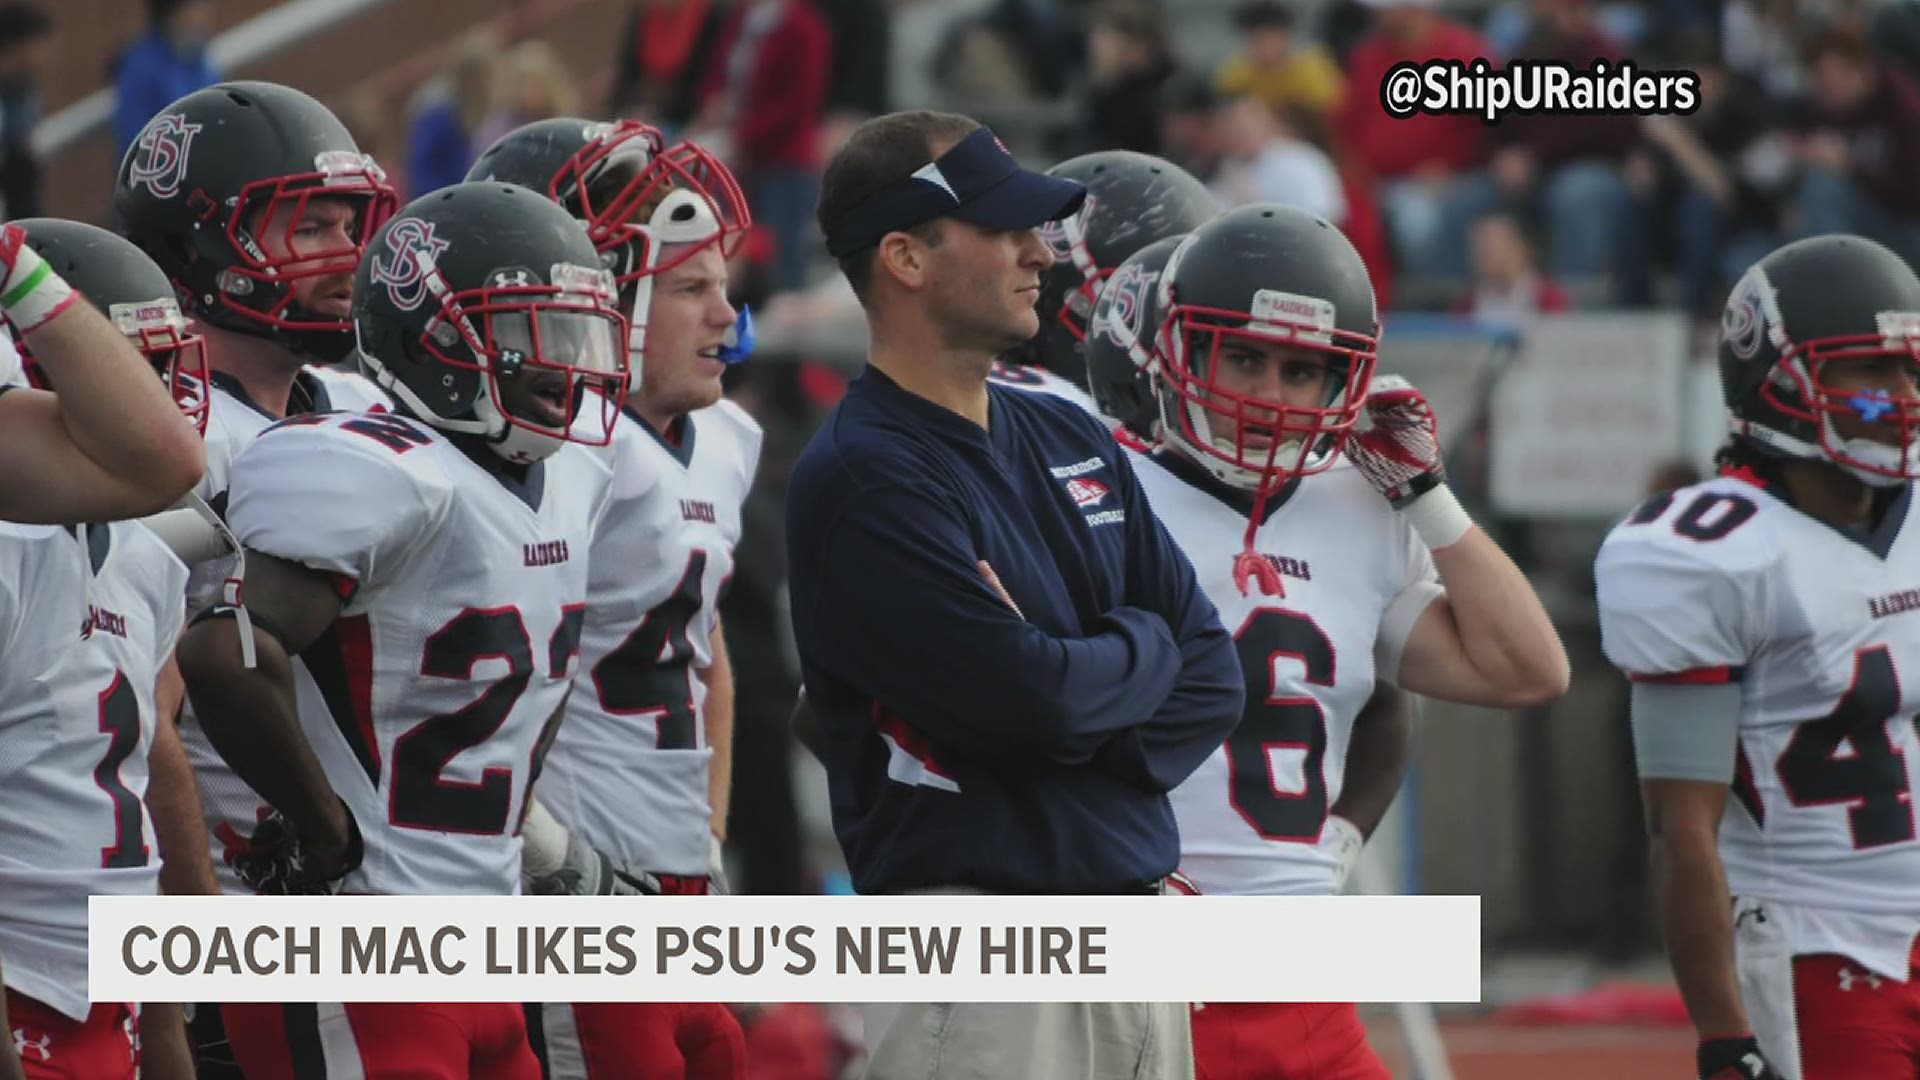 The Nittany Lions new offensive coordinator held the same role with Shippensburg from 2011-2012.